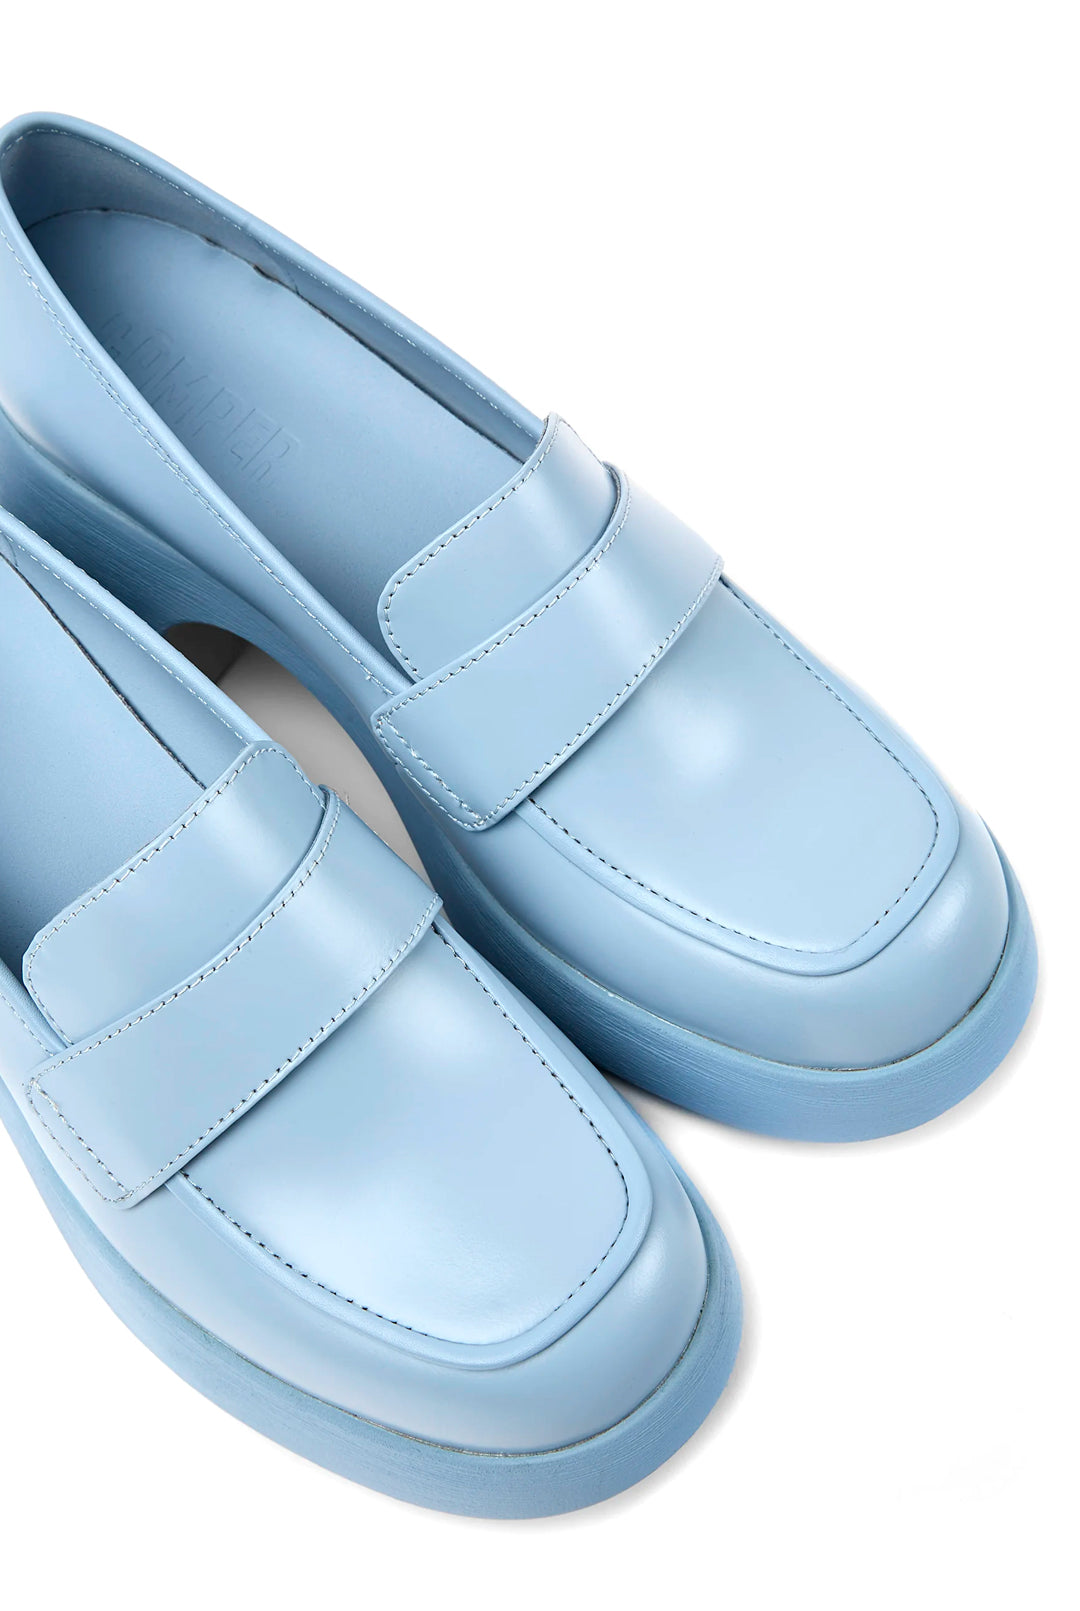 Camper Thelma Loafers, Blue